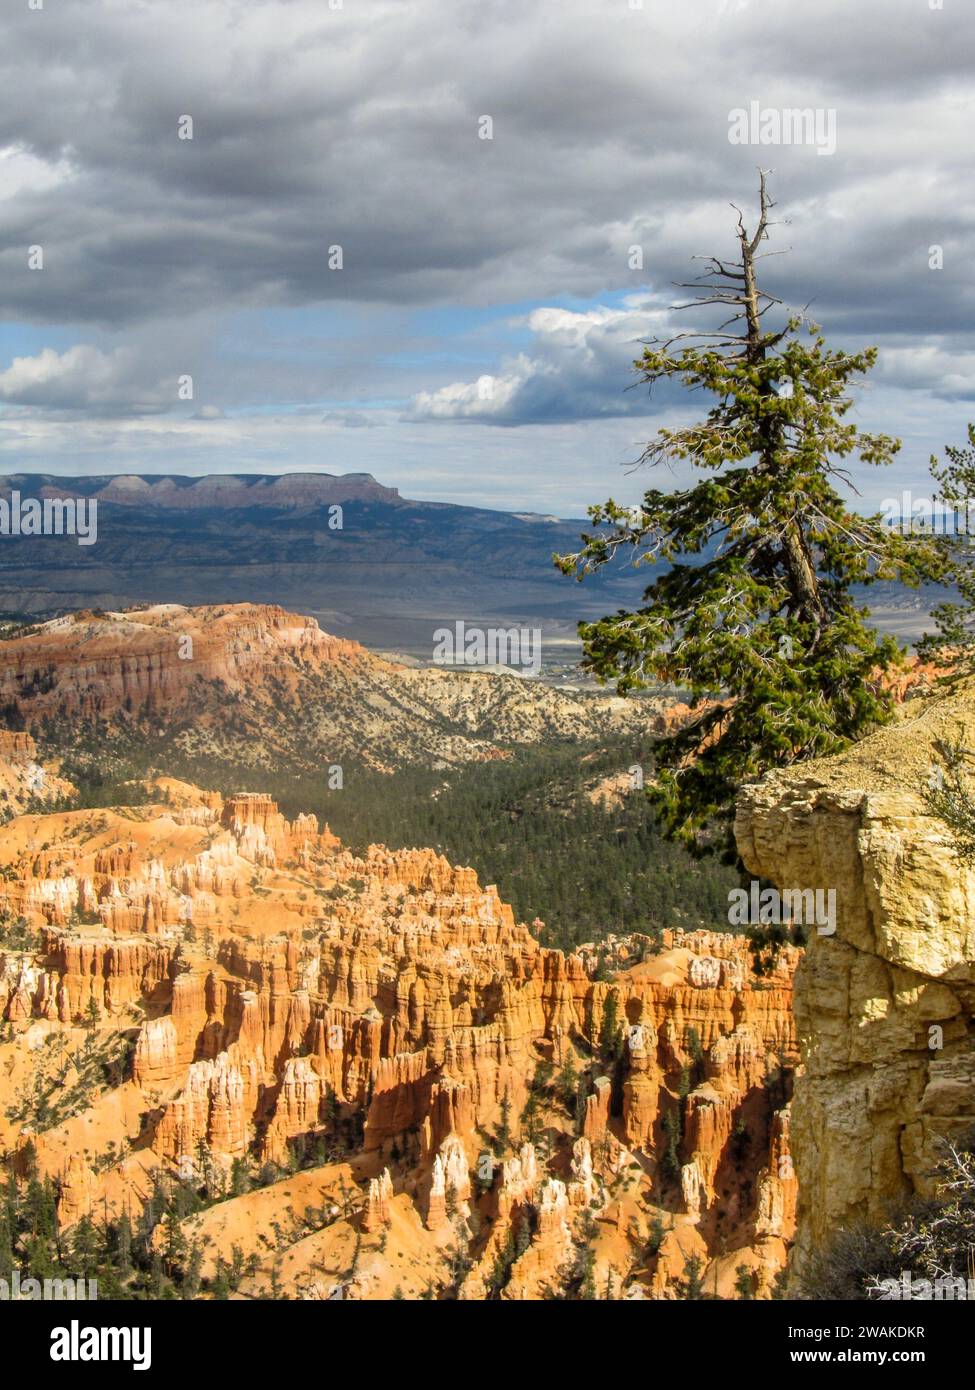 A weather-beaten Bristlecone pine on the edge of a cliff with the strange and mysterious hoodoo filled landscape of Bryce Canyon in the background Stock Photo